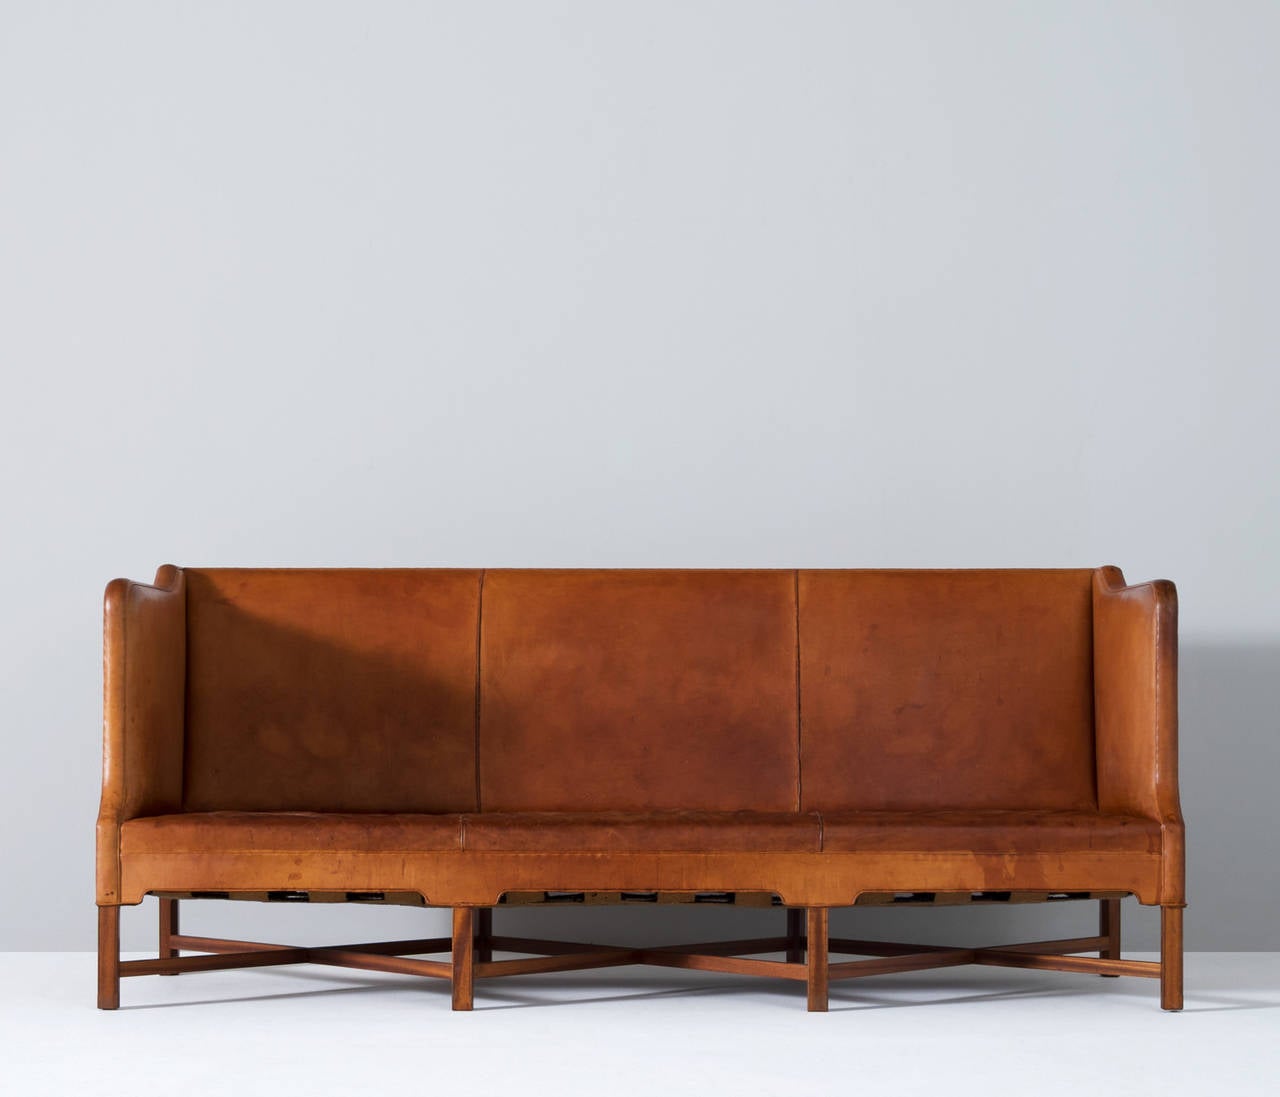 Designed by Kaare Klint, cabinetmaker Rud Rasmussen, Copenhagen Denmark.
Very good designed sofa with high quality seating. This typical frame is made of Cuban mahogany wood.

Please note the condition is good with minor flaws and light surface